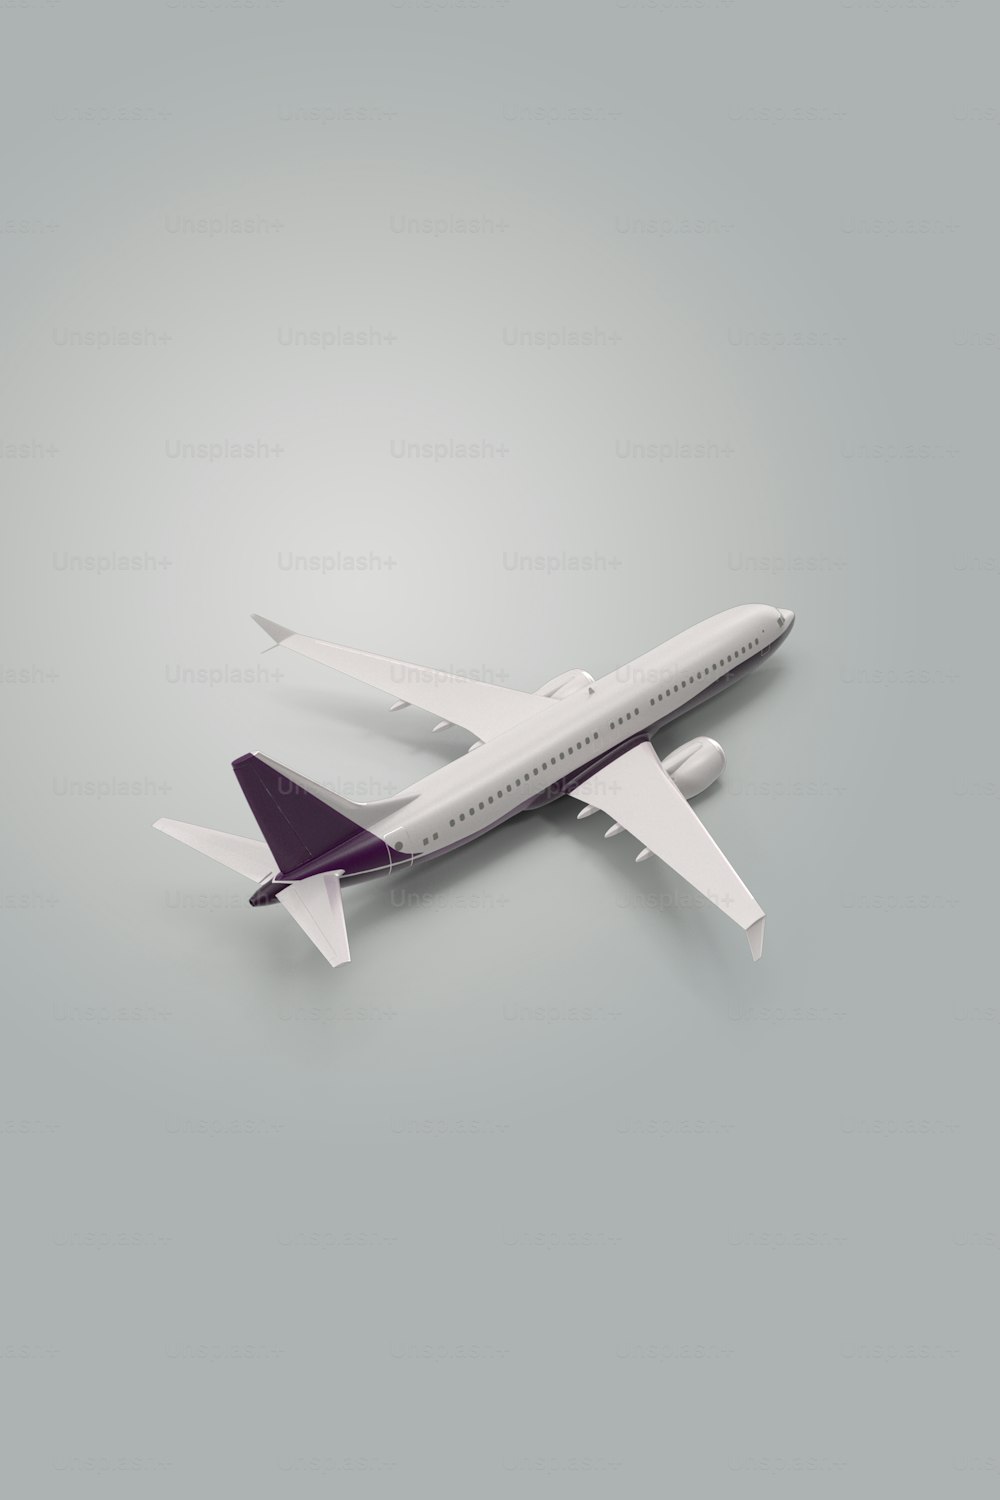 a model of an airplane on a gray background